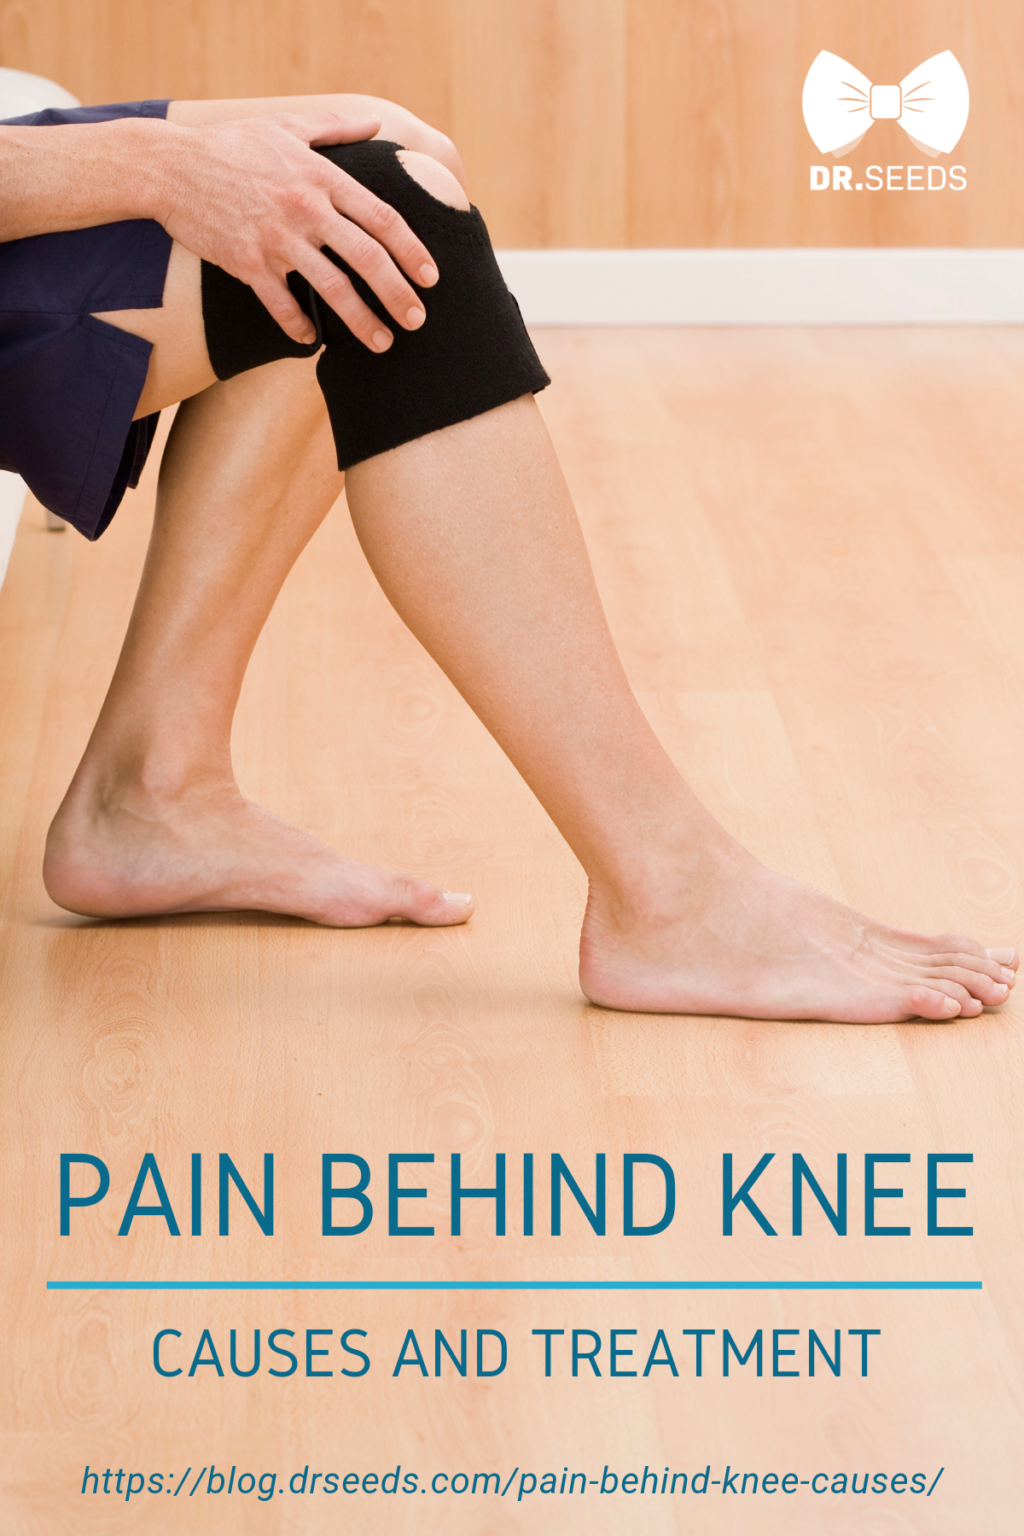 Pain Behind Knee: Causes and Treatment